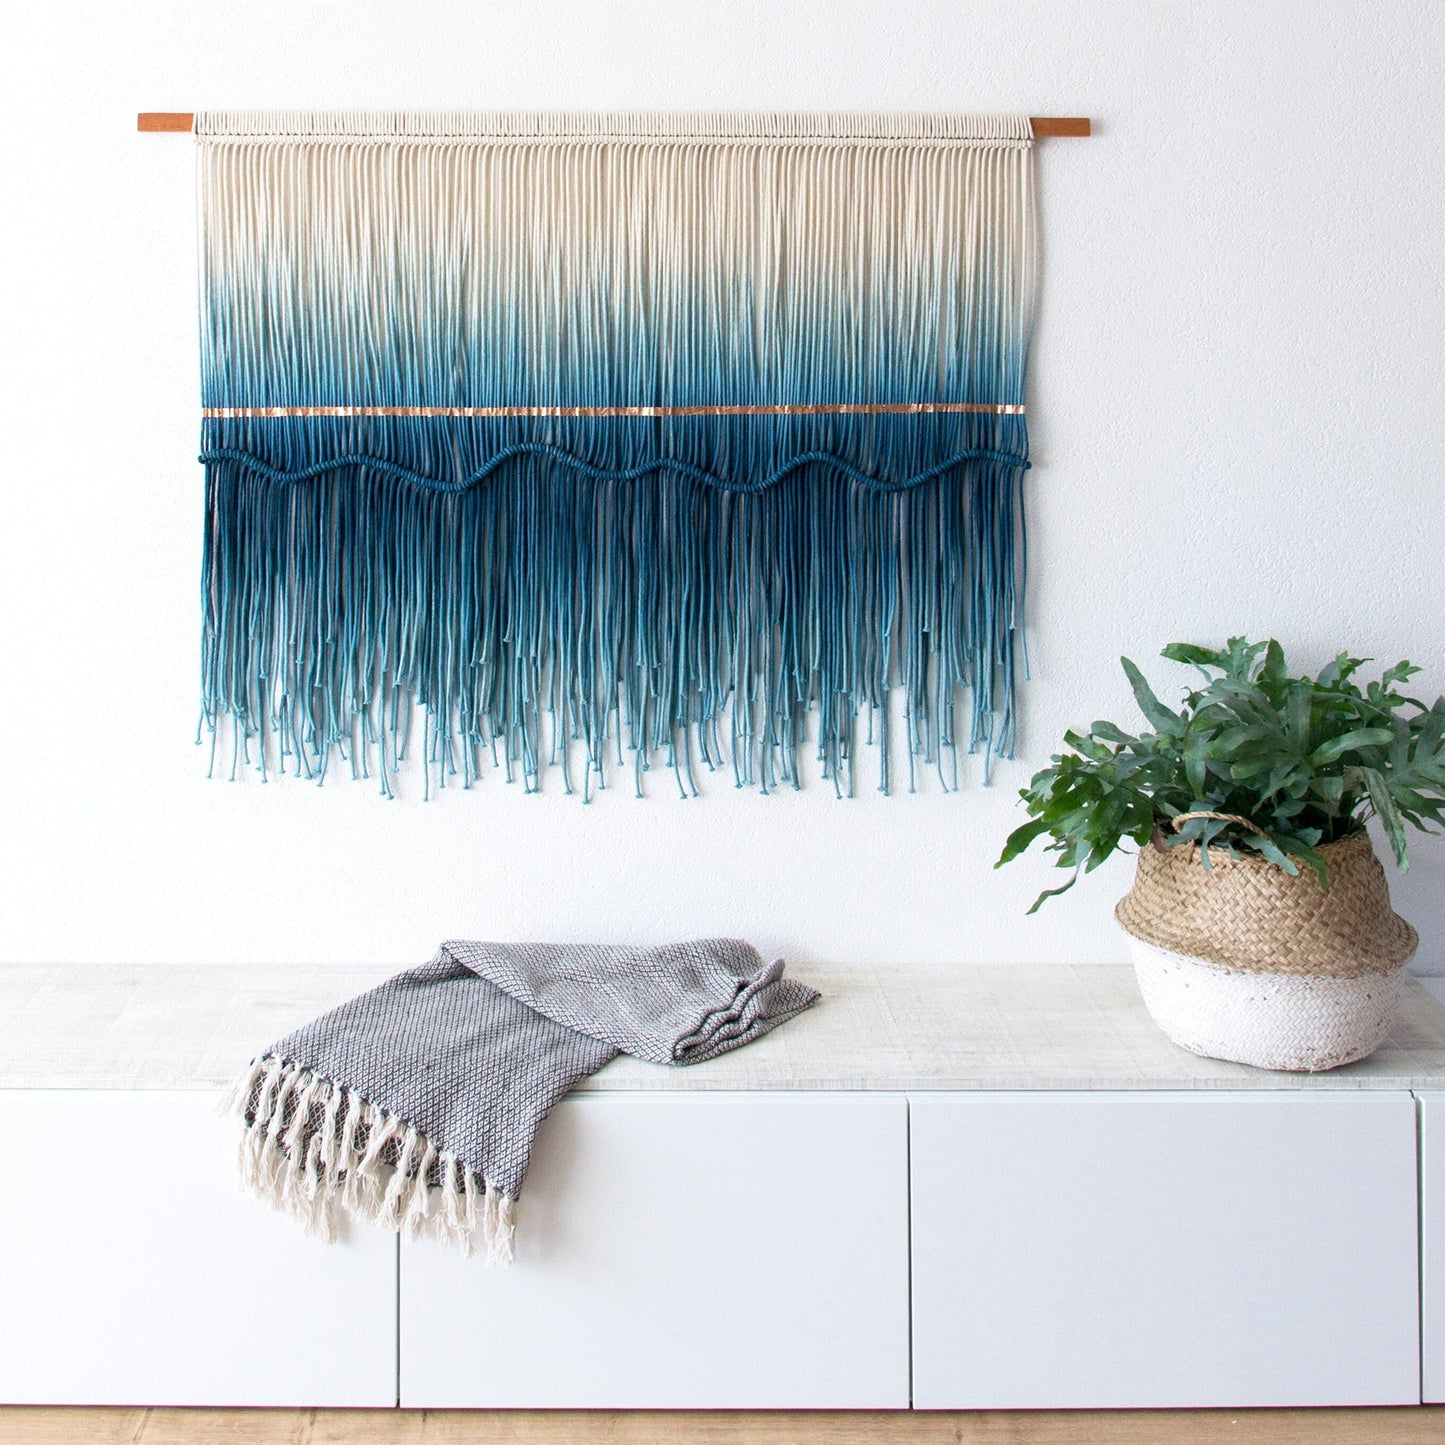 Large Macrame Wall Hanging - Knotted Rope Wall Hanging - "SEA VIEW" - MAIA HOMES